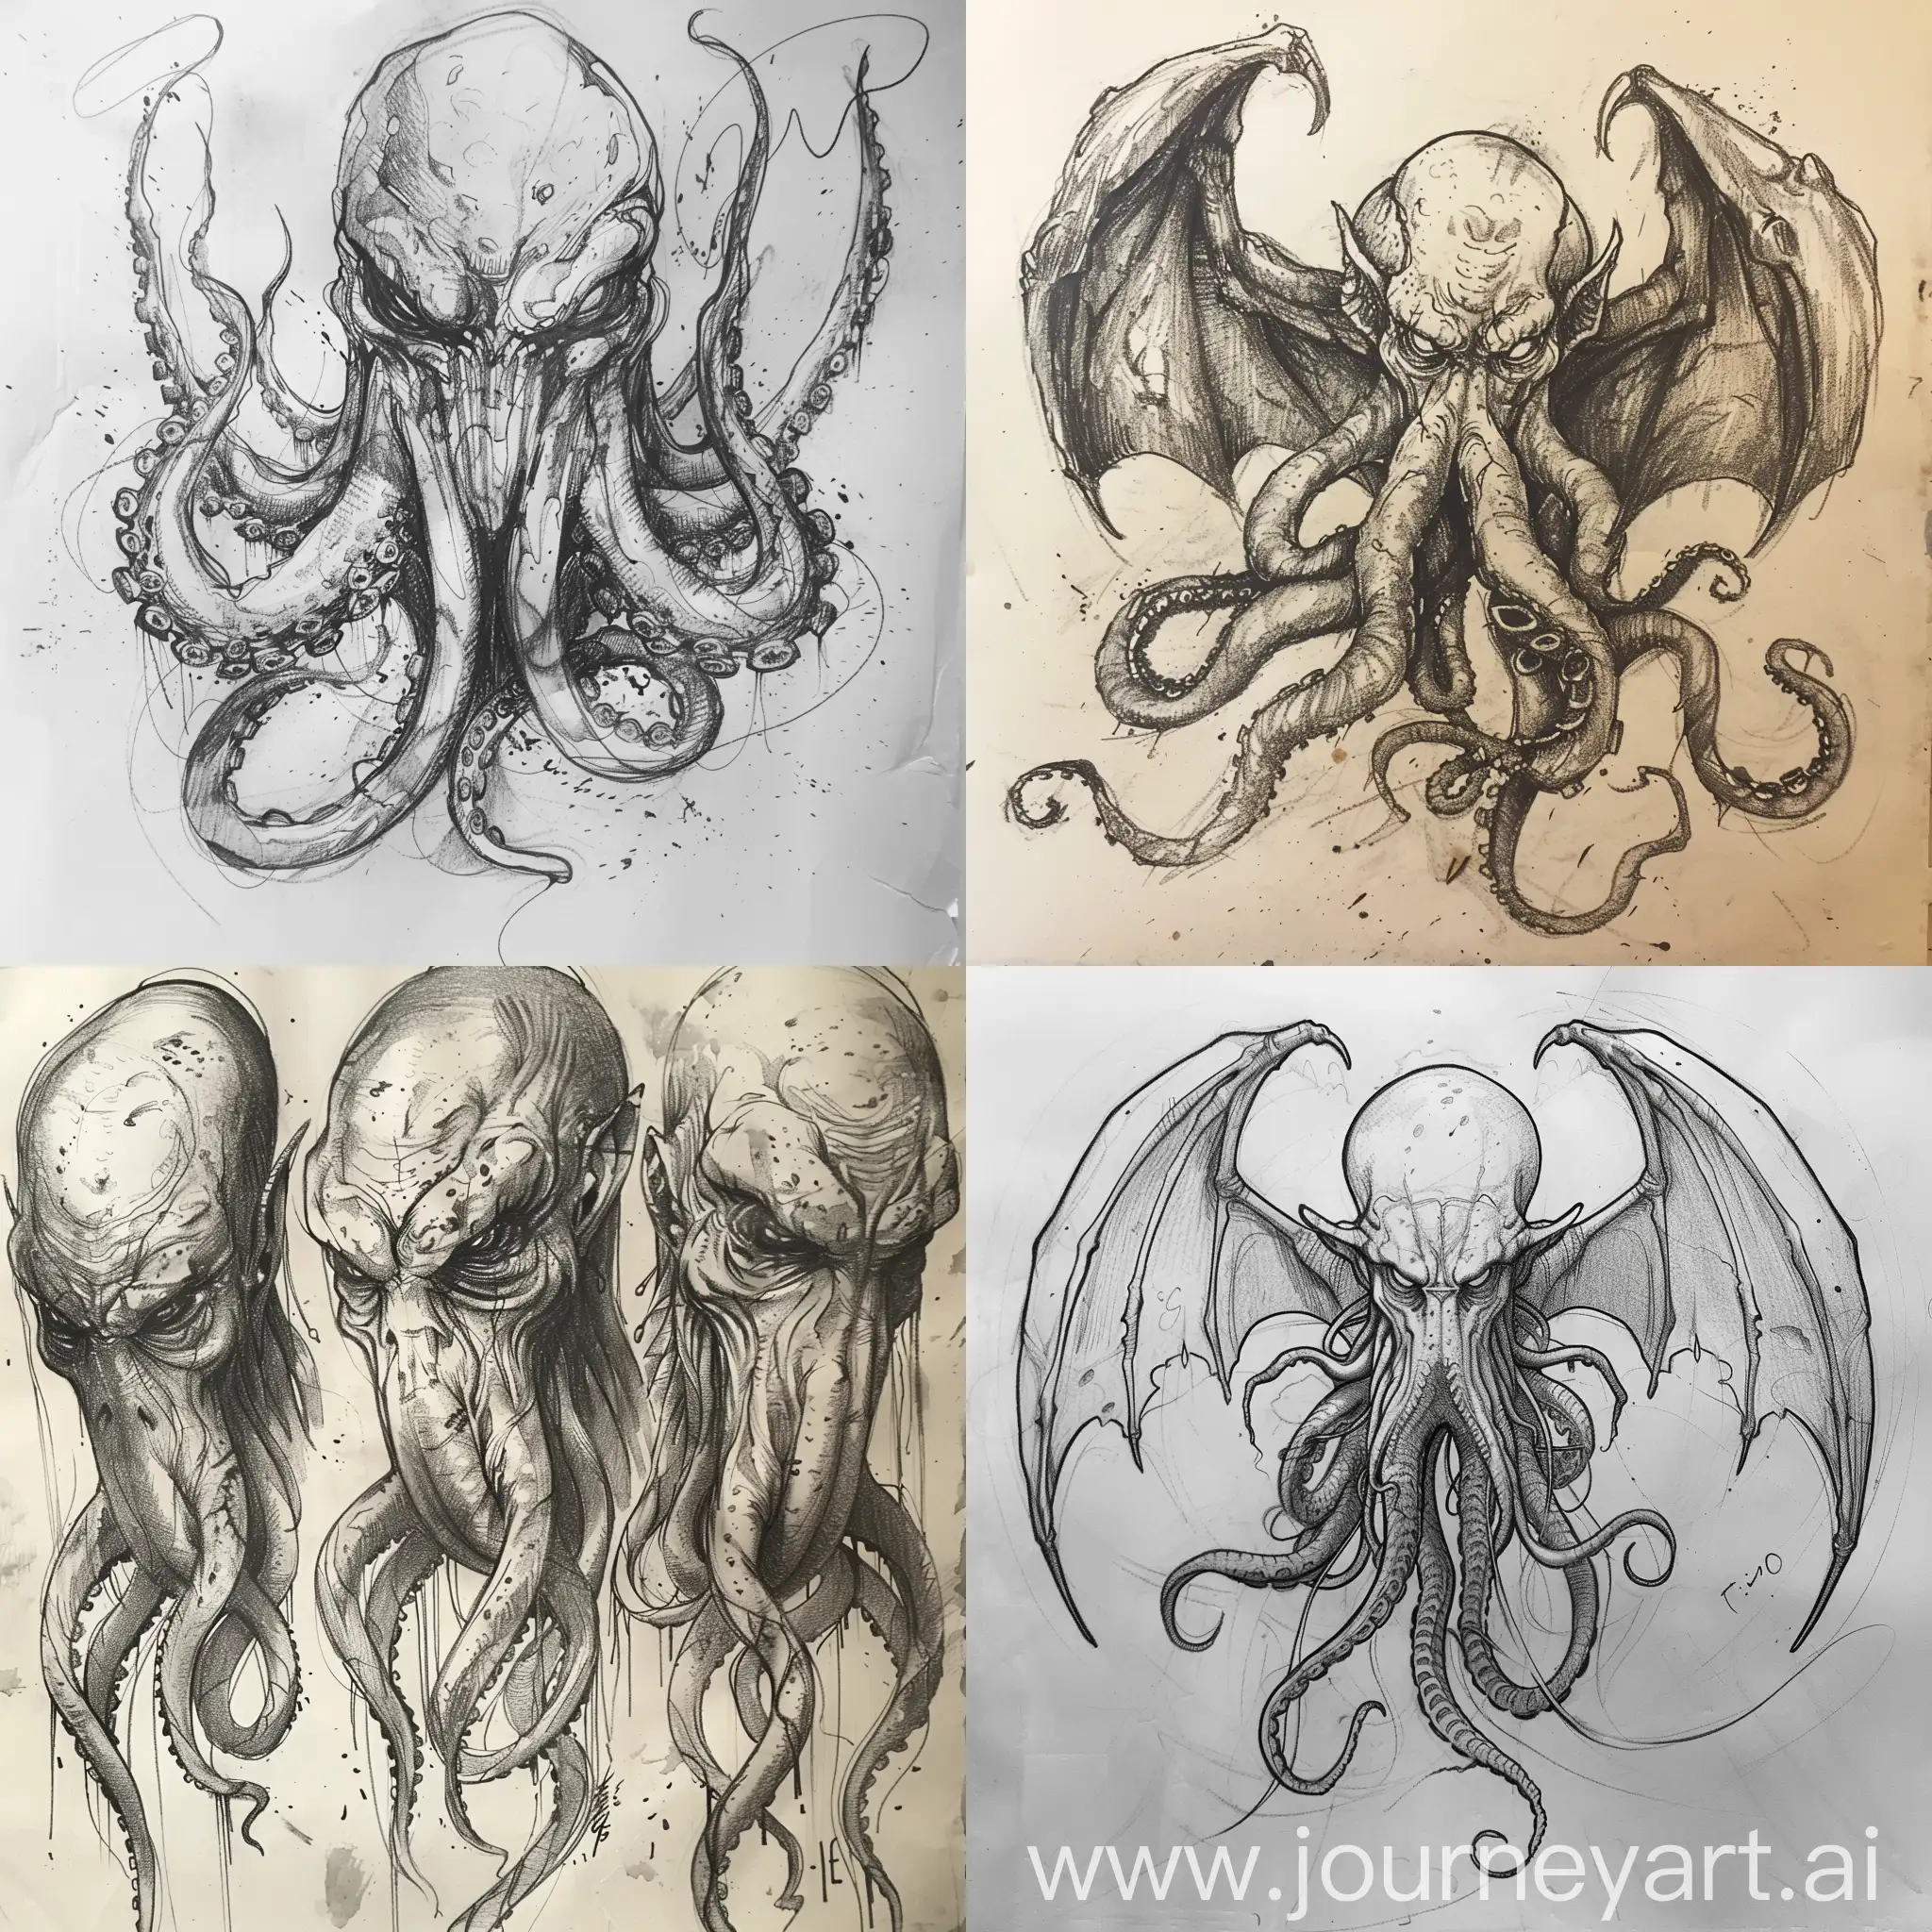 Modern-Cthulhu-Sketches-Surreal-Lovecraftian-Art